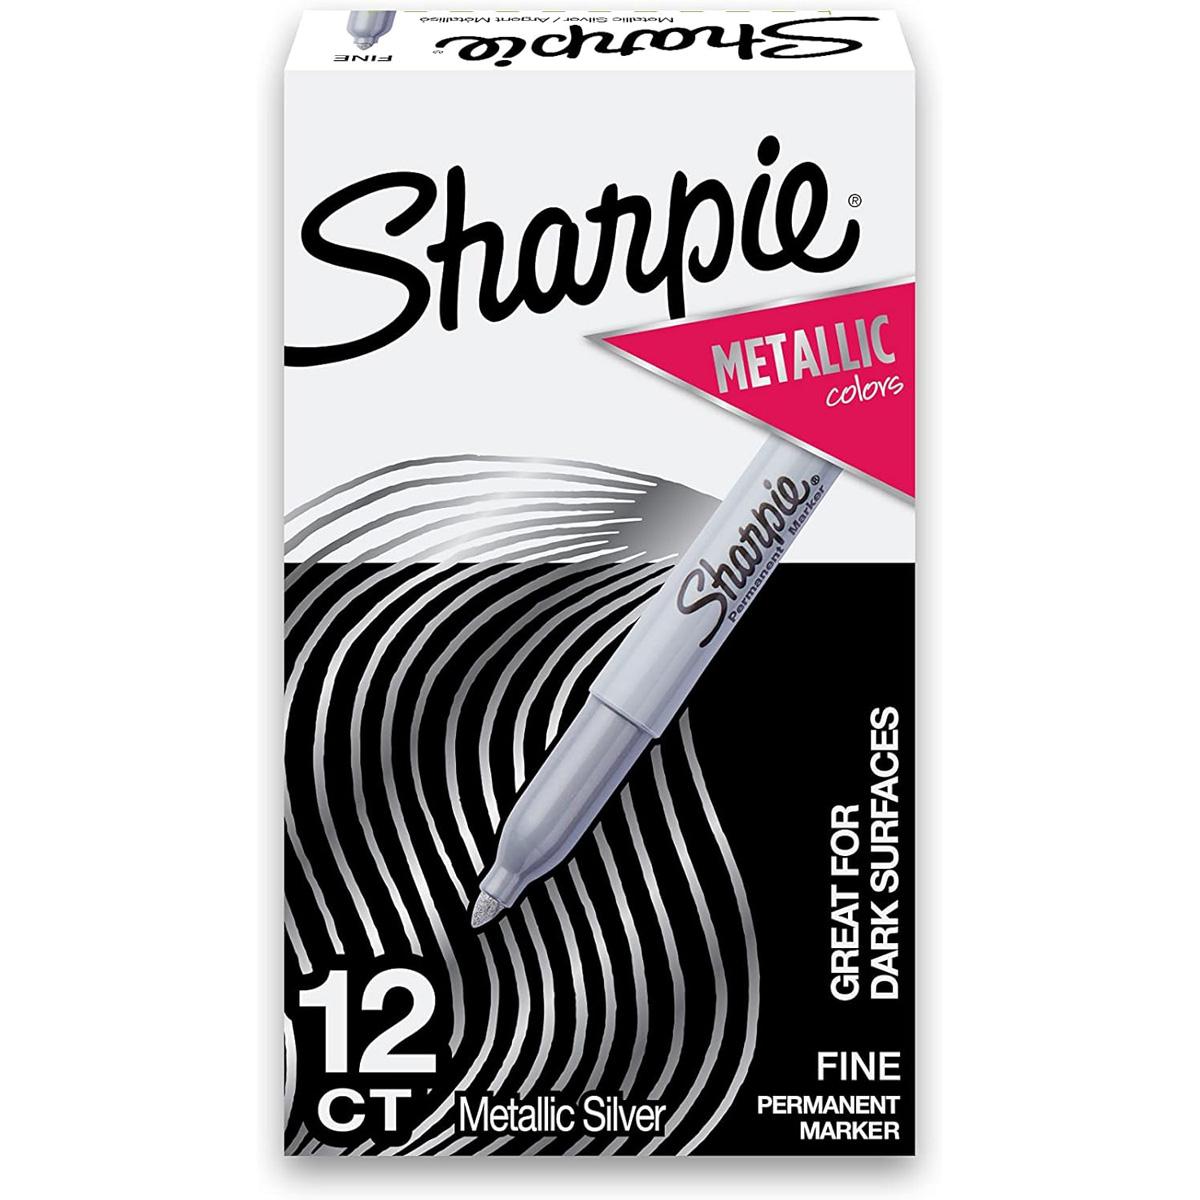 Sharpie Metallic Fine Tip Permanent Markers 12 Pack for $7.74 Shipped